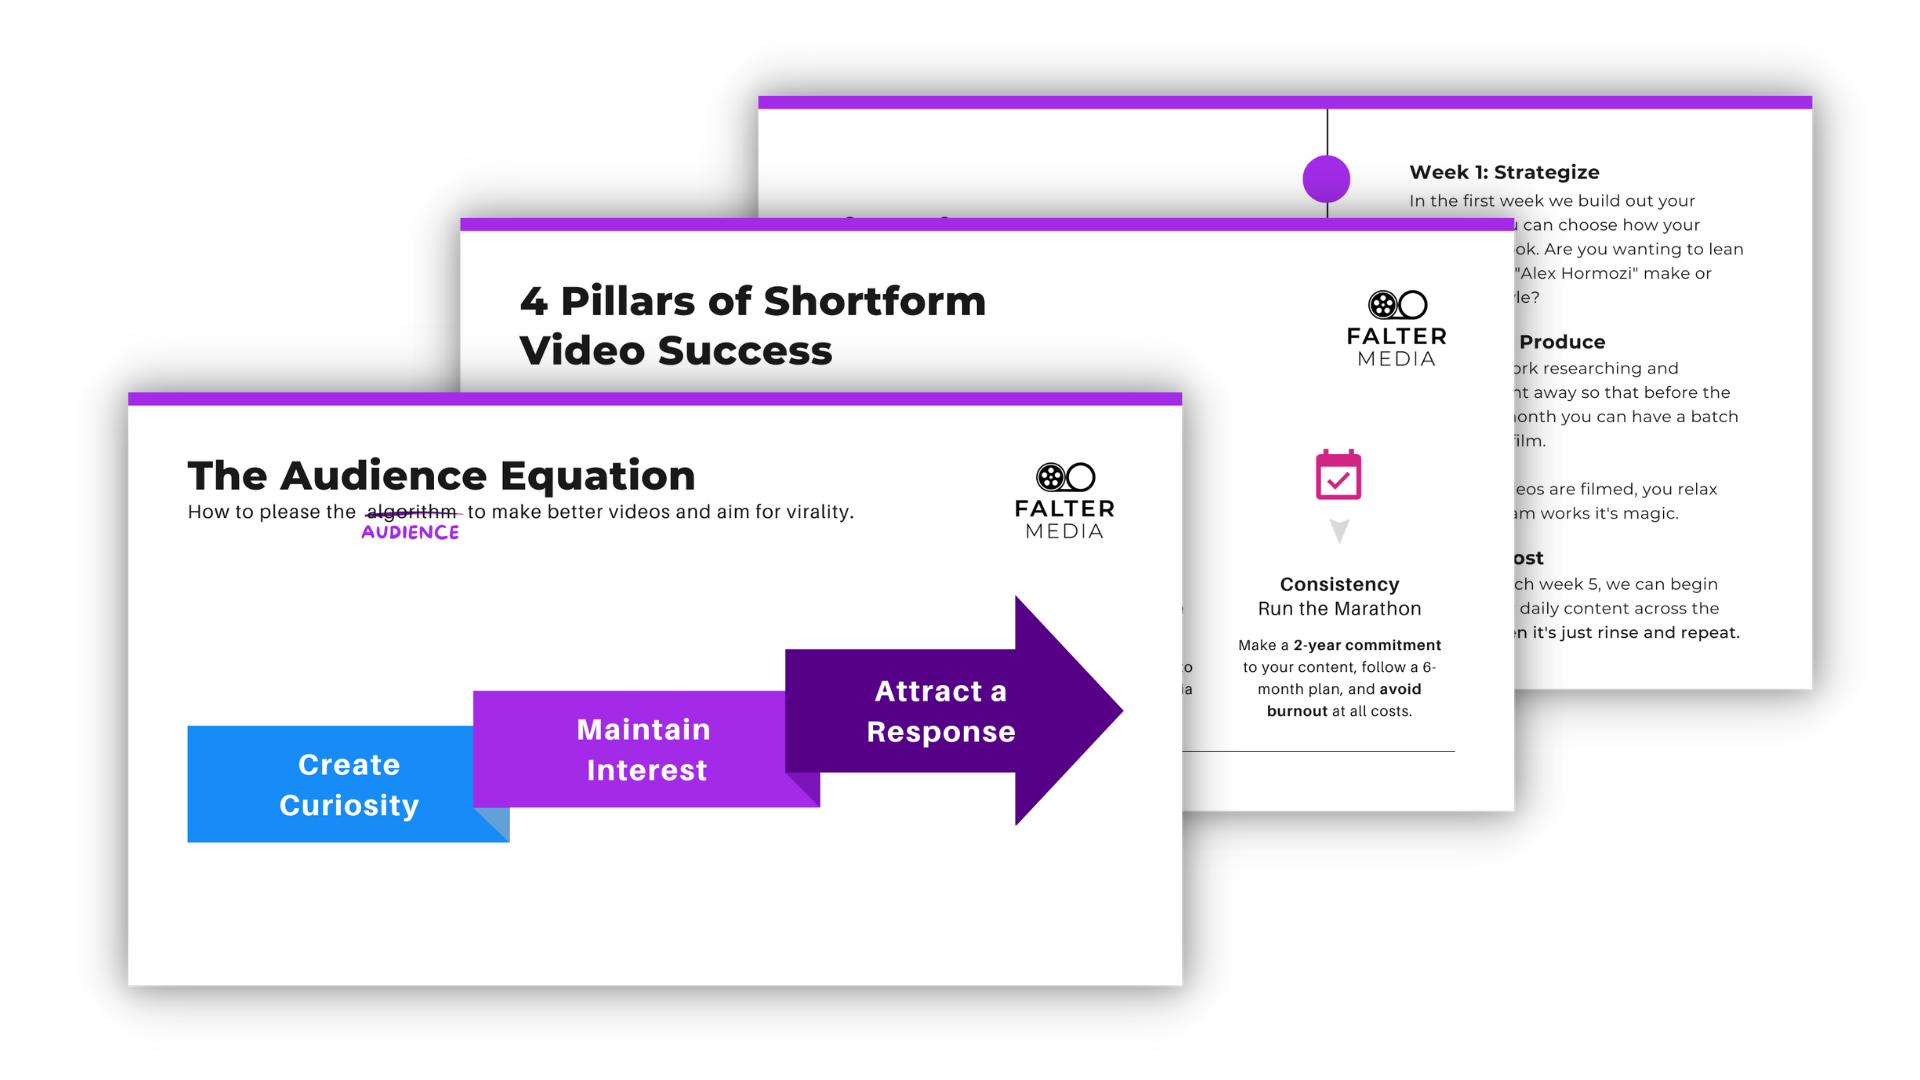 A proven video marketing strategy for experts